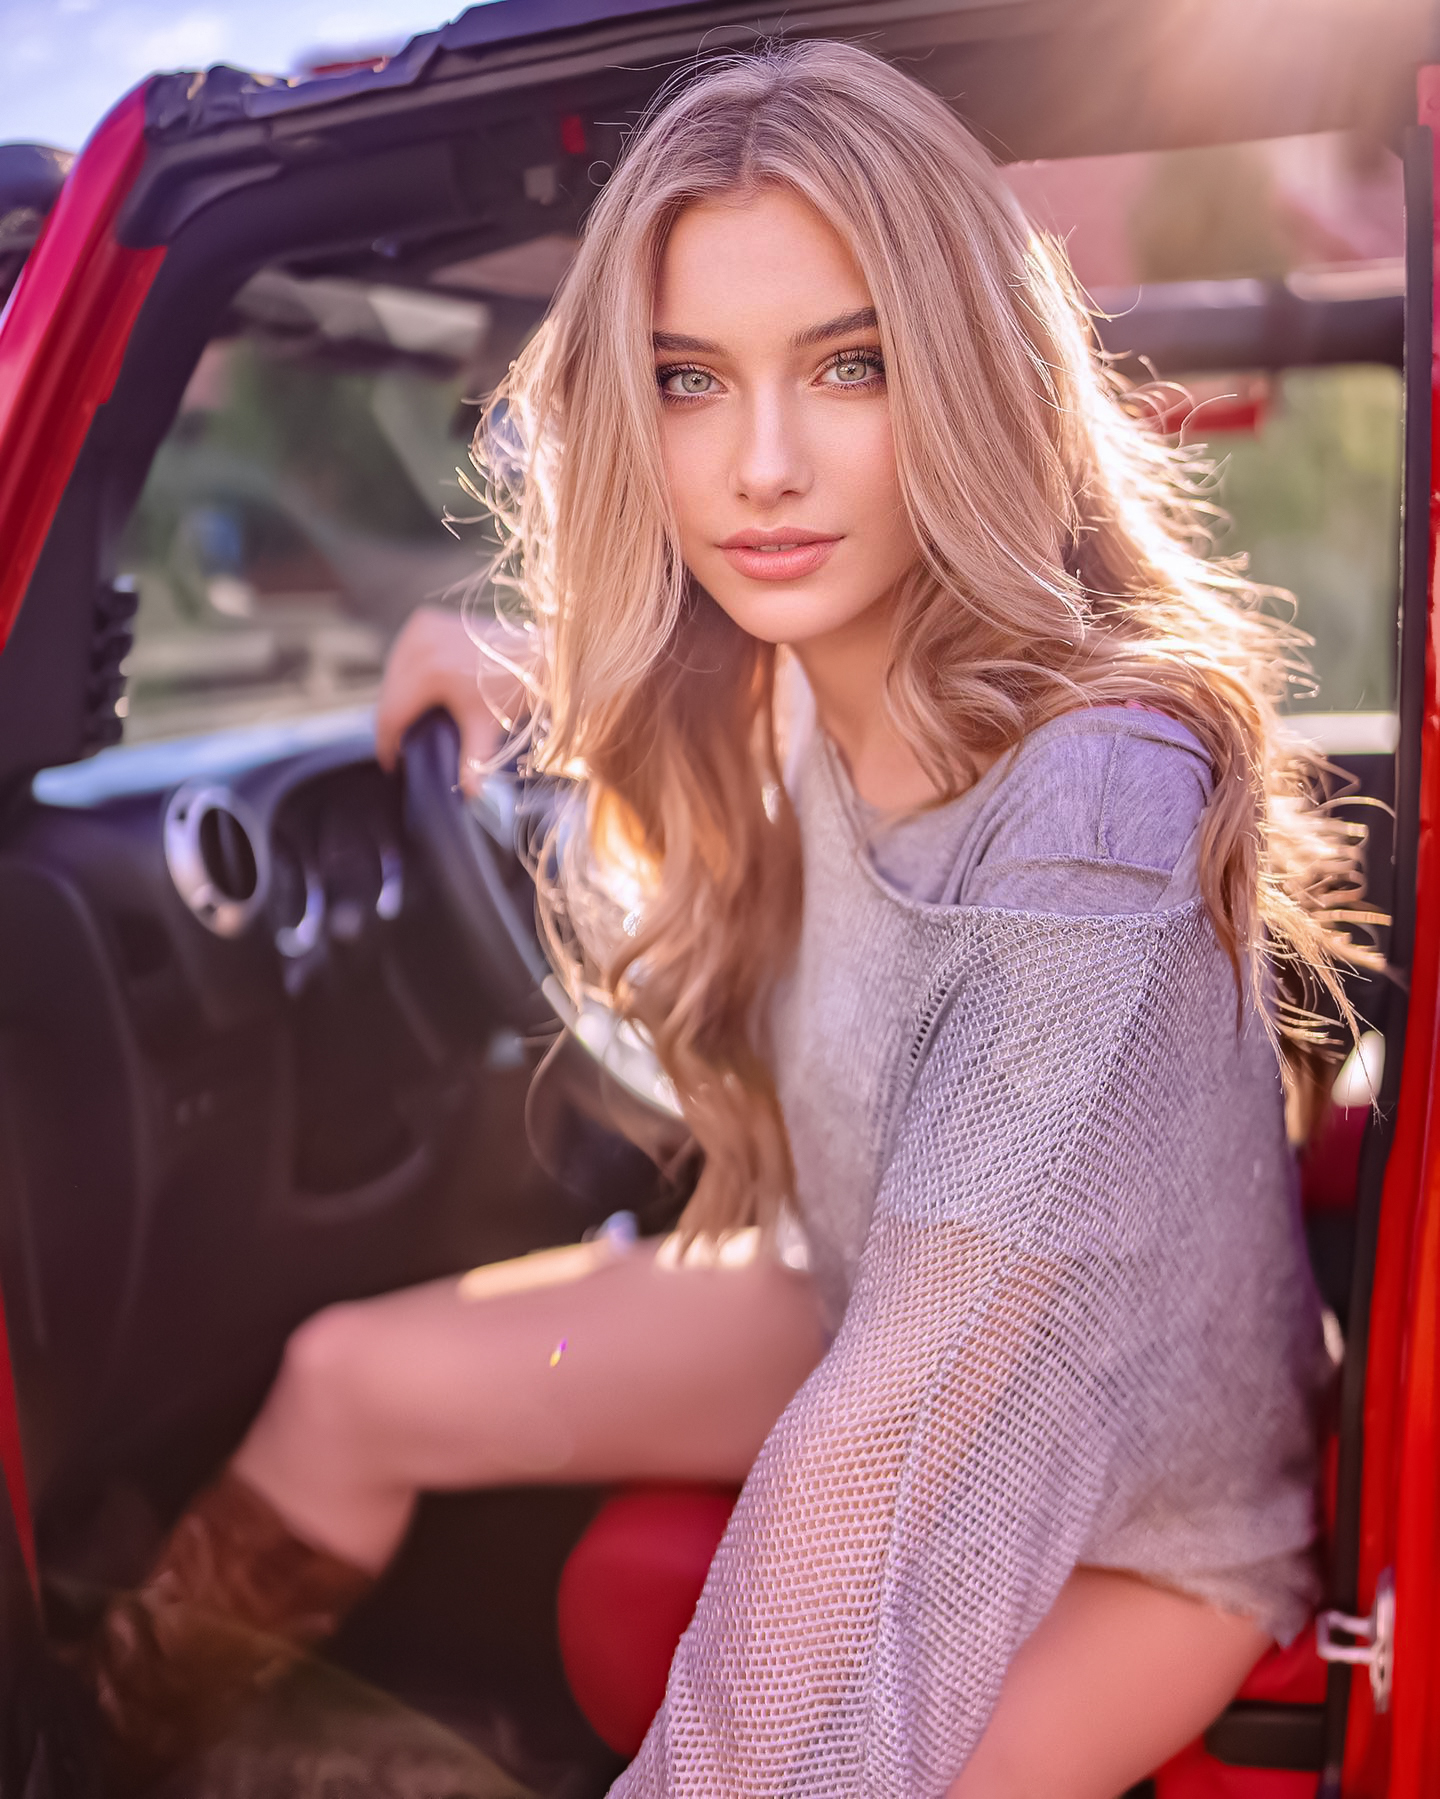 People 1440x1799 Sagaj Photography women Alexandra Lenarchyk blonde long hair wavy hair purple clothing blue eyes looking at viewer car interior car red sunlight sun rays brown boots sitting in the car Jeep cowboy boots model women outdoors